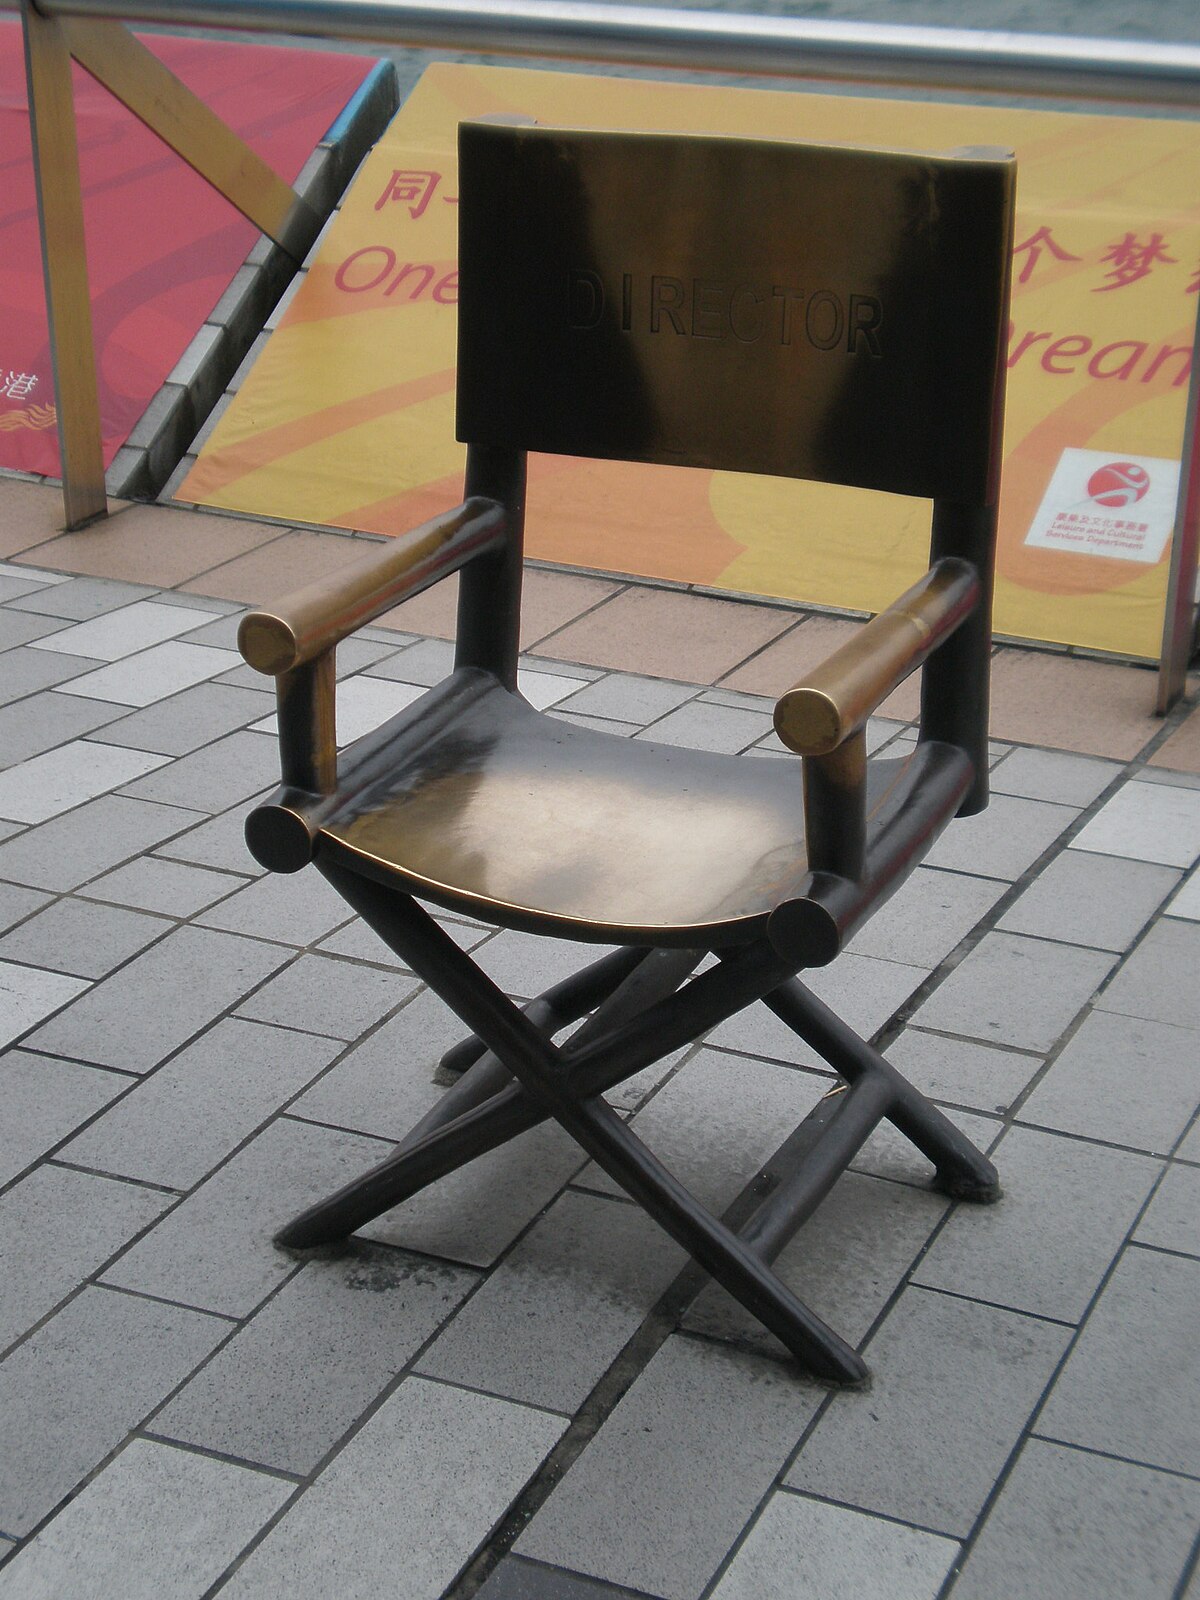 A director's chair